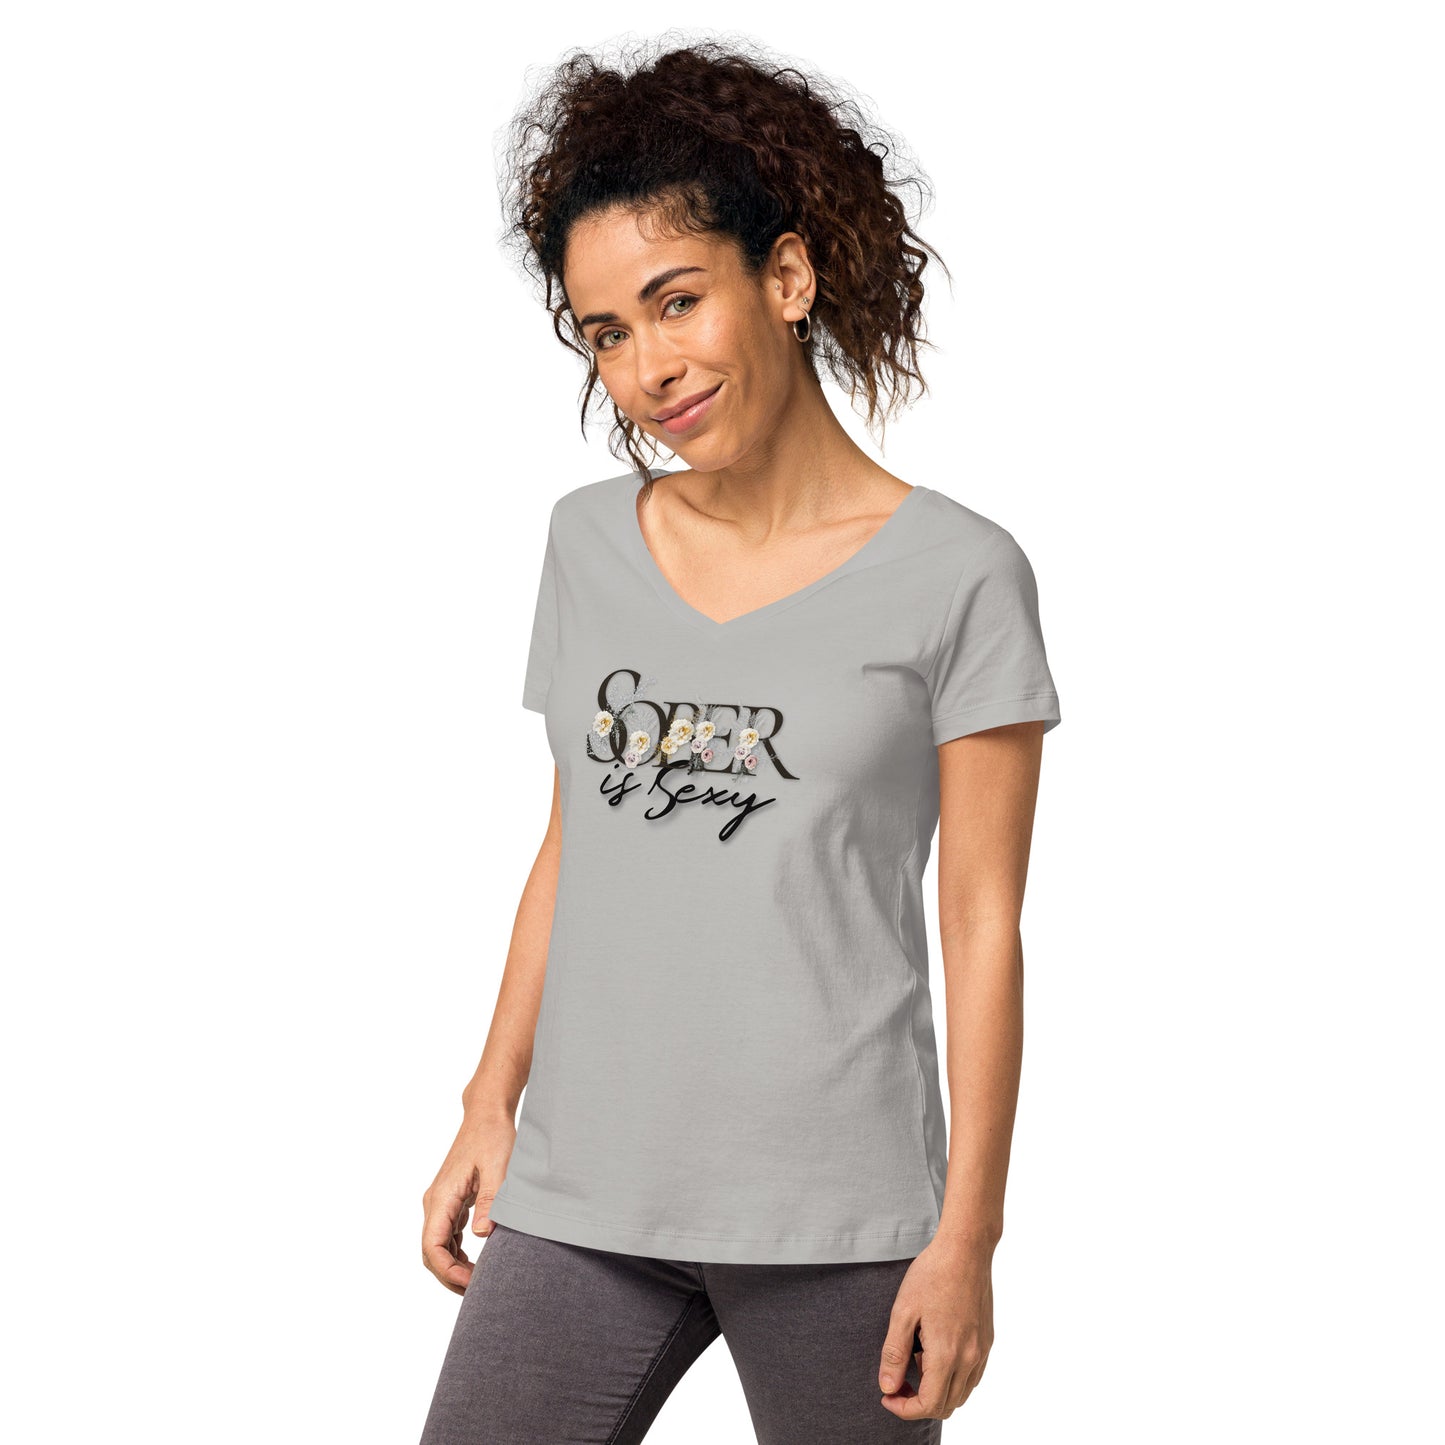 Sober is Sexy - Women’s fitted v-neck t-shirt